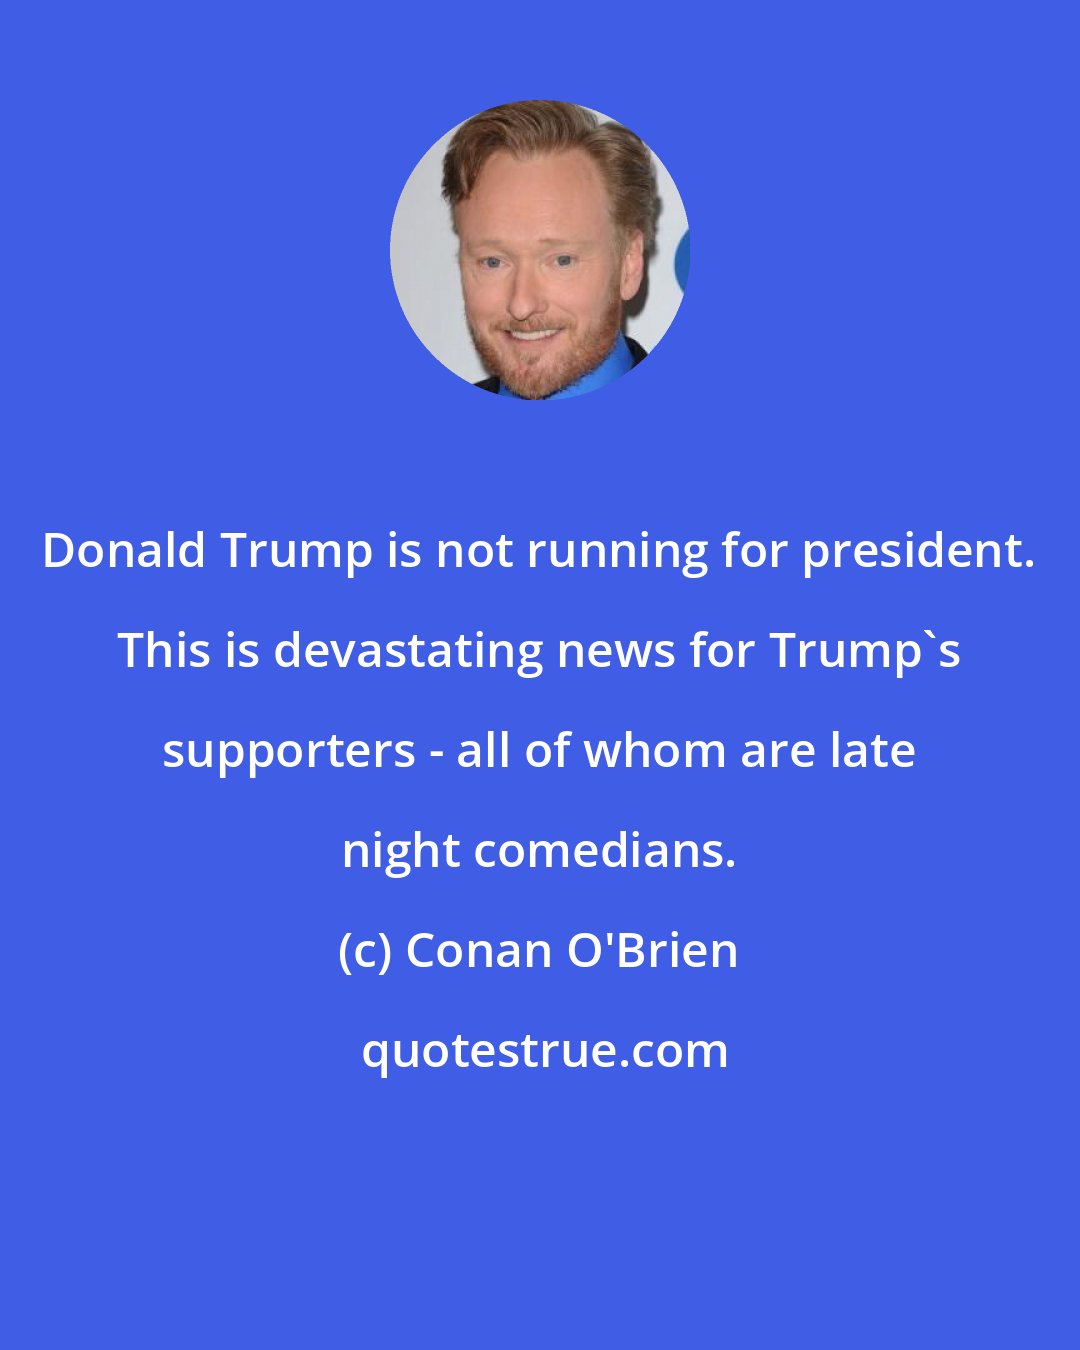 Conan O'Brien: Donald Trump is not running for president. This is devastating news for Trump's supporters - all of whom are late night comedians.